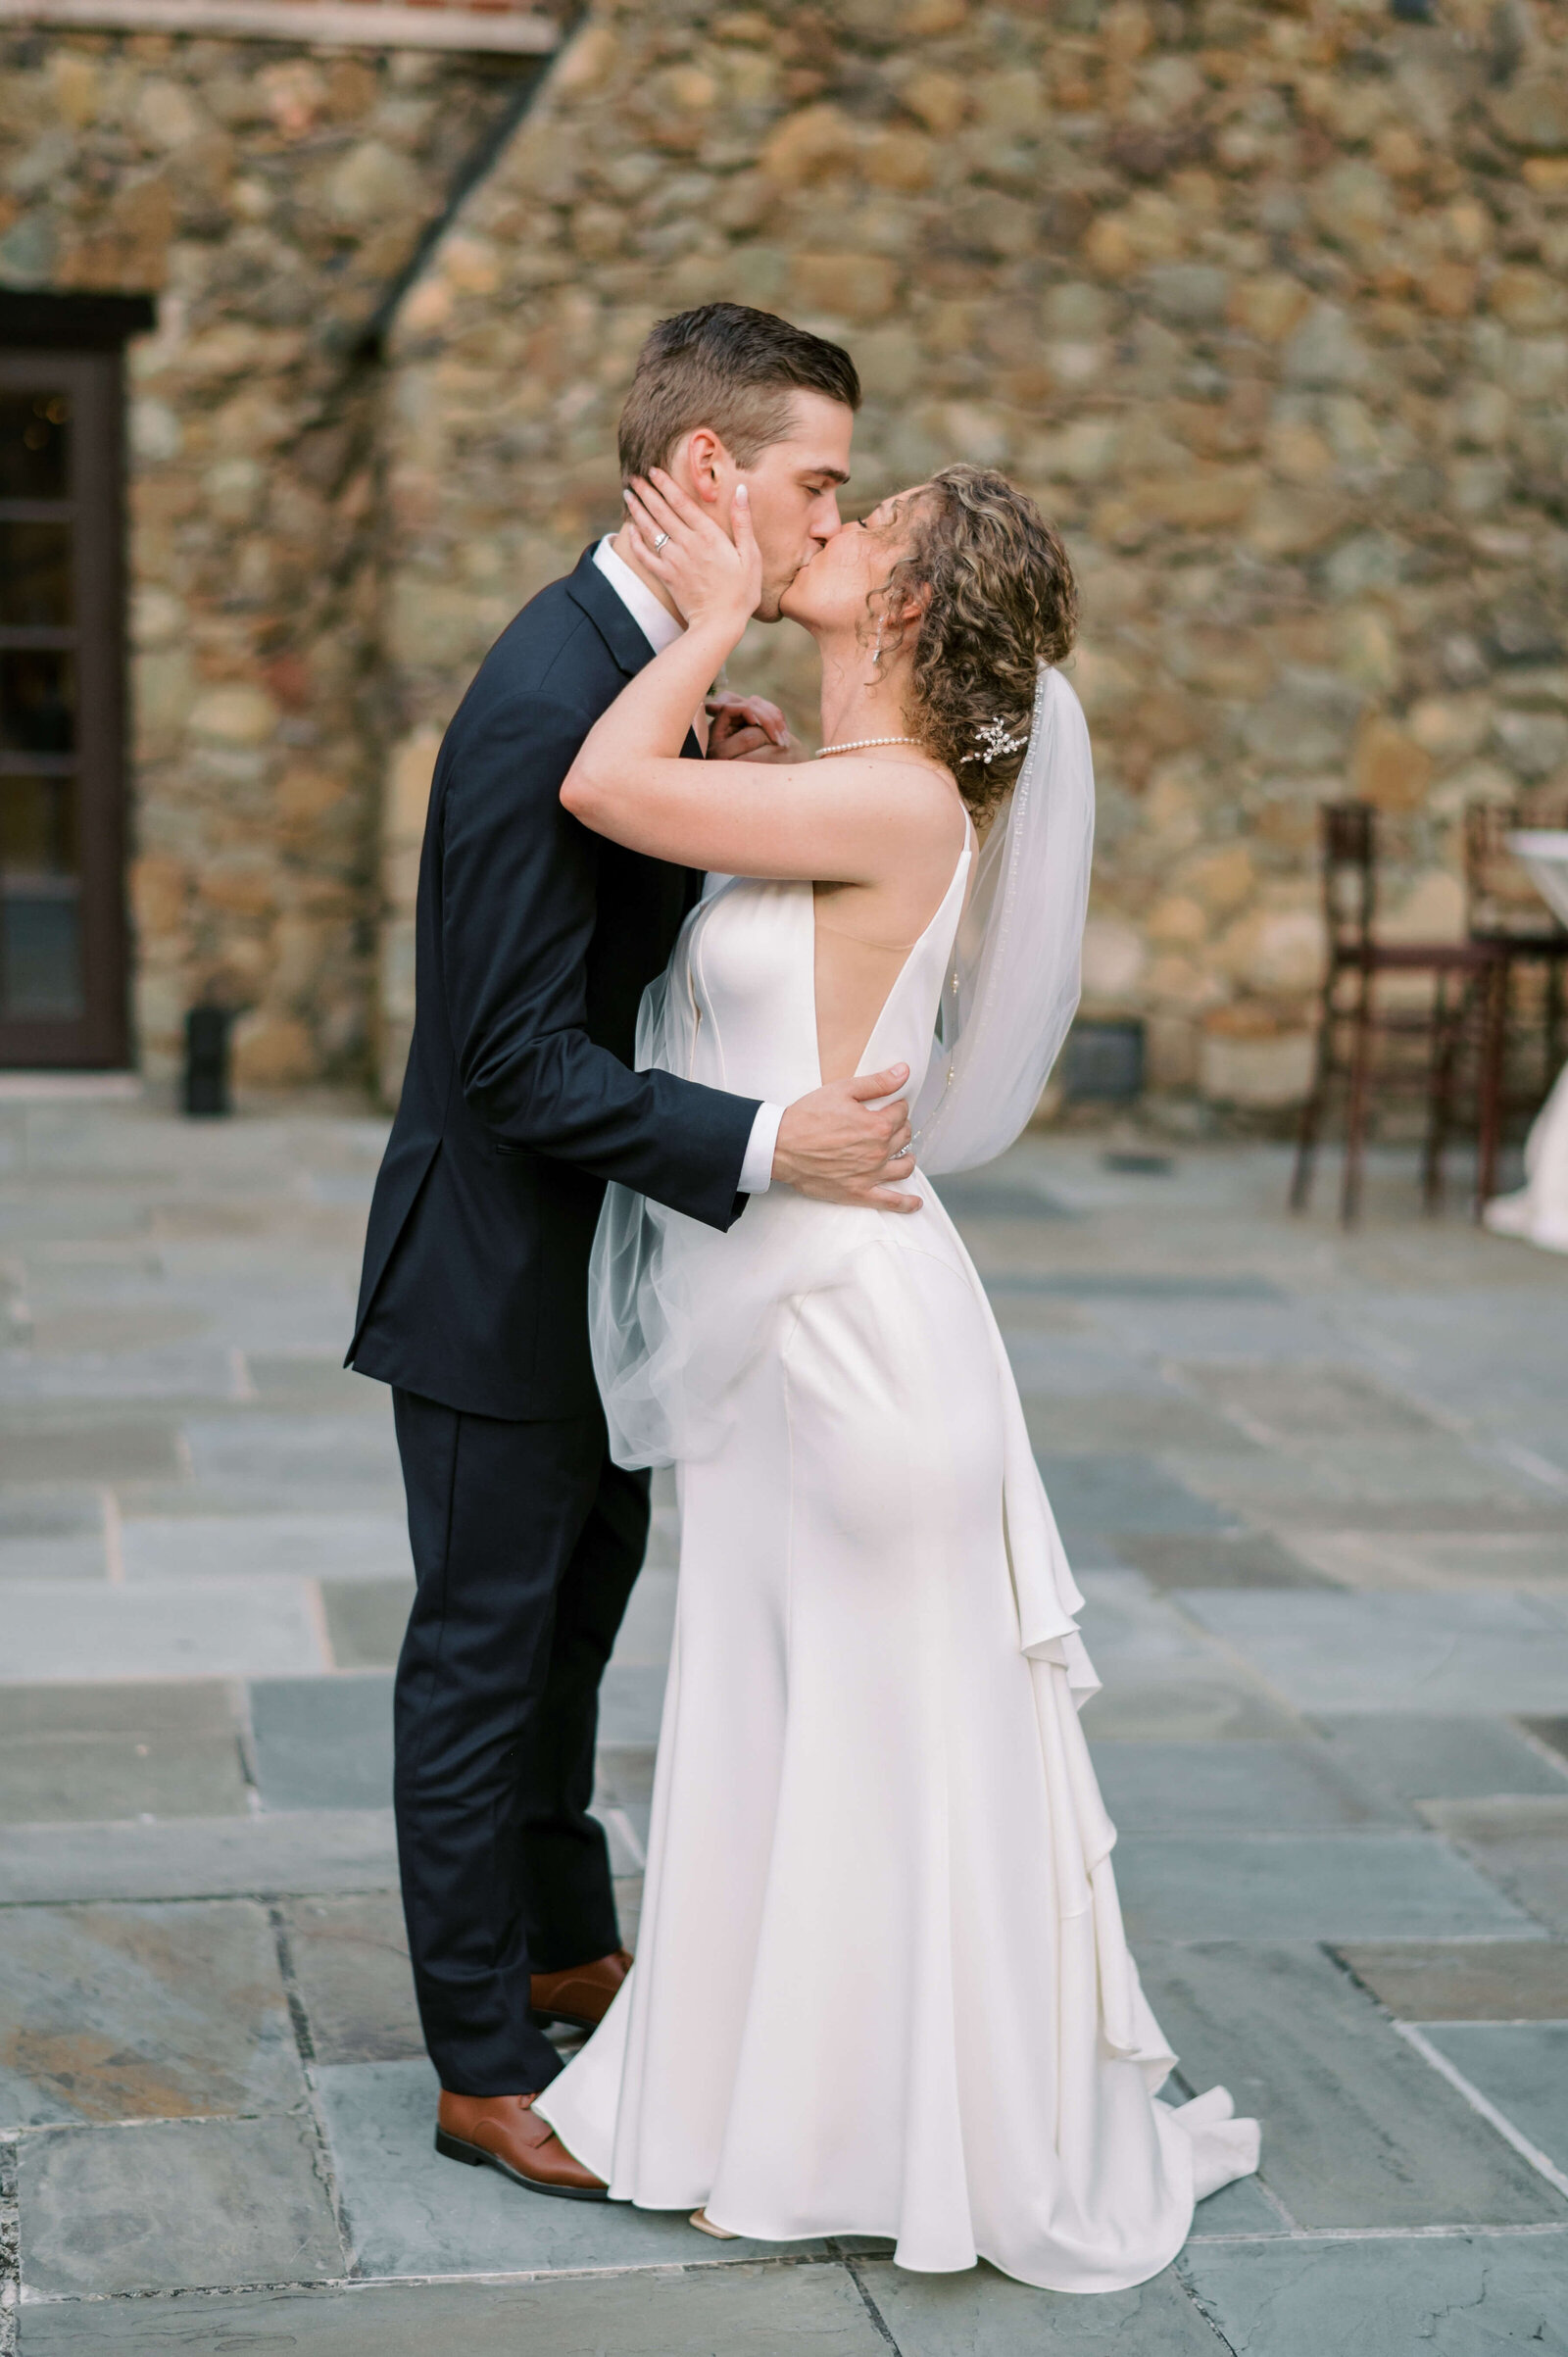 The bride and groom passionately kiss after their Virginia wedding